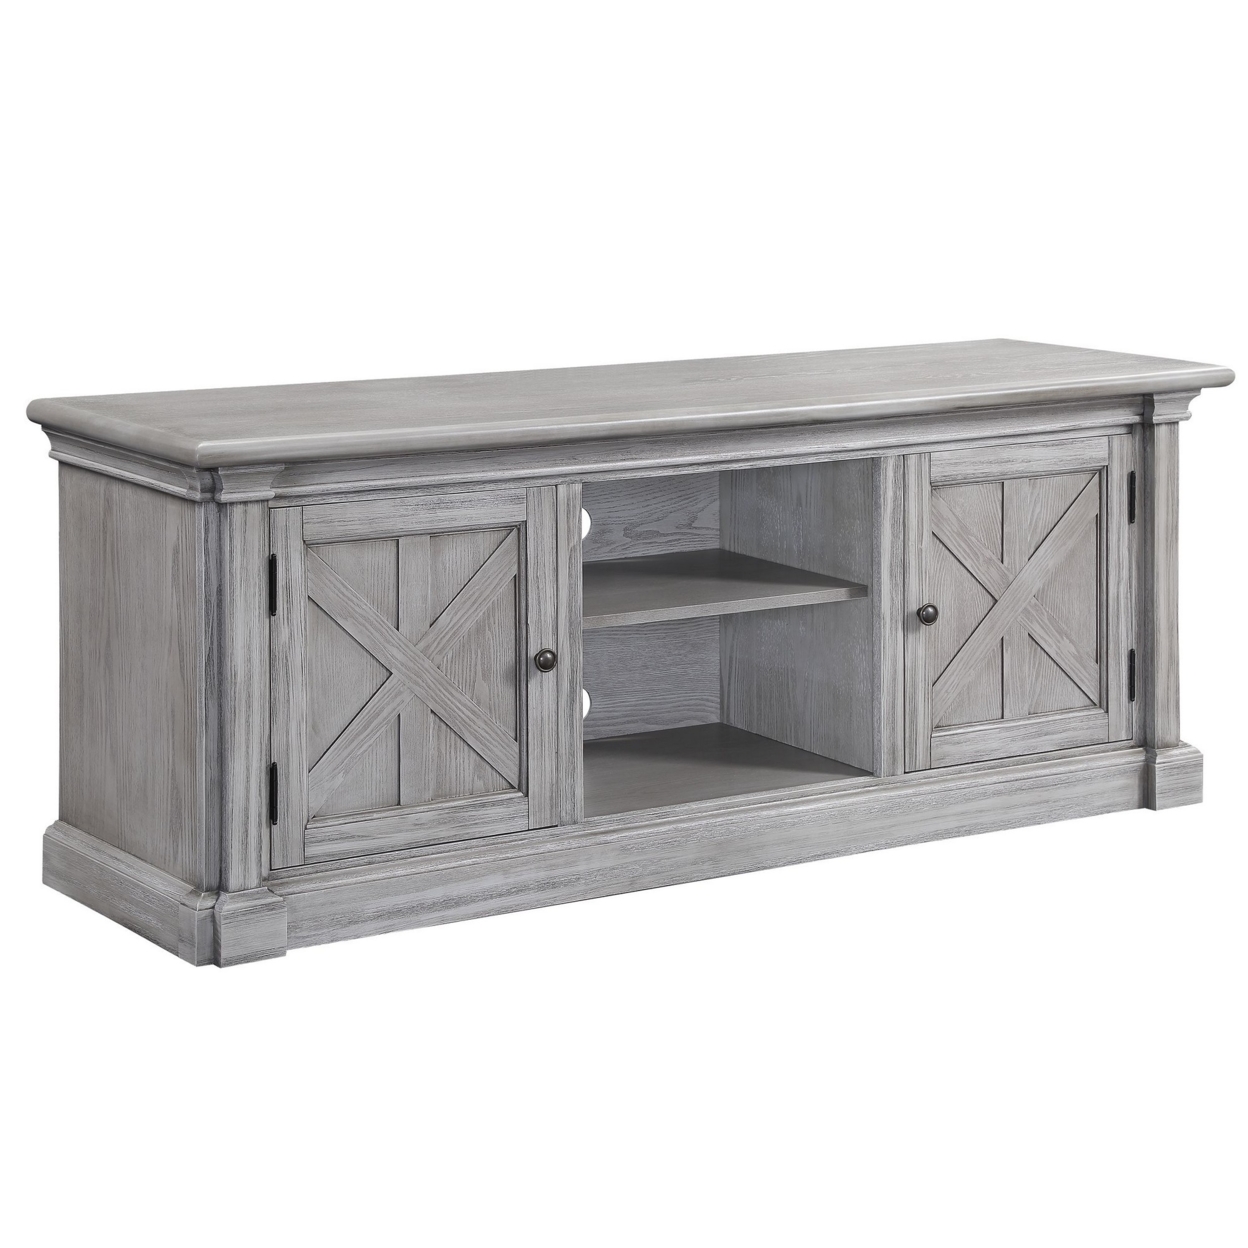 TV Stand With MDF 2 Door Storage And Farmhouse Style, Gray- Saltoro Sherpi